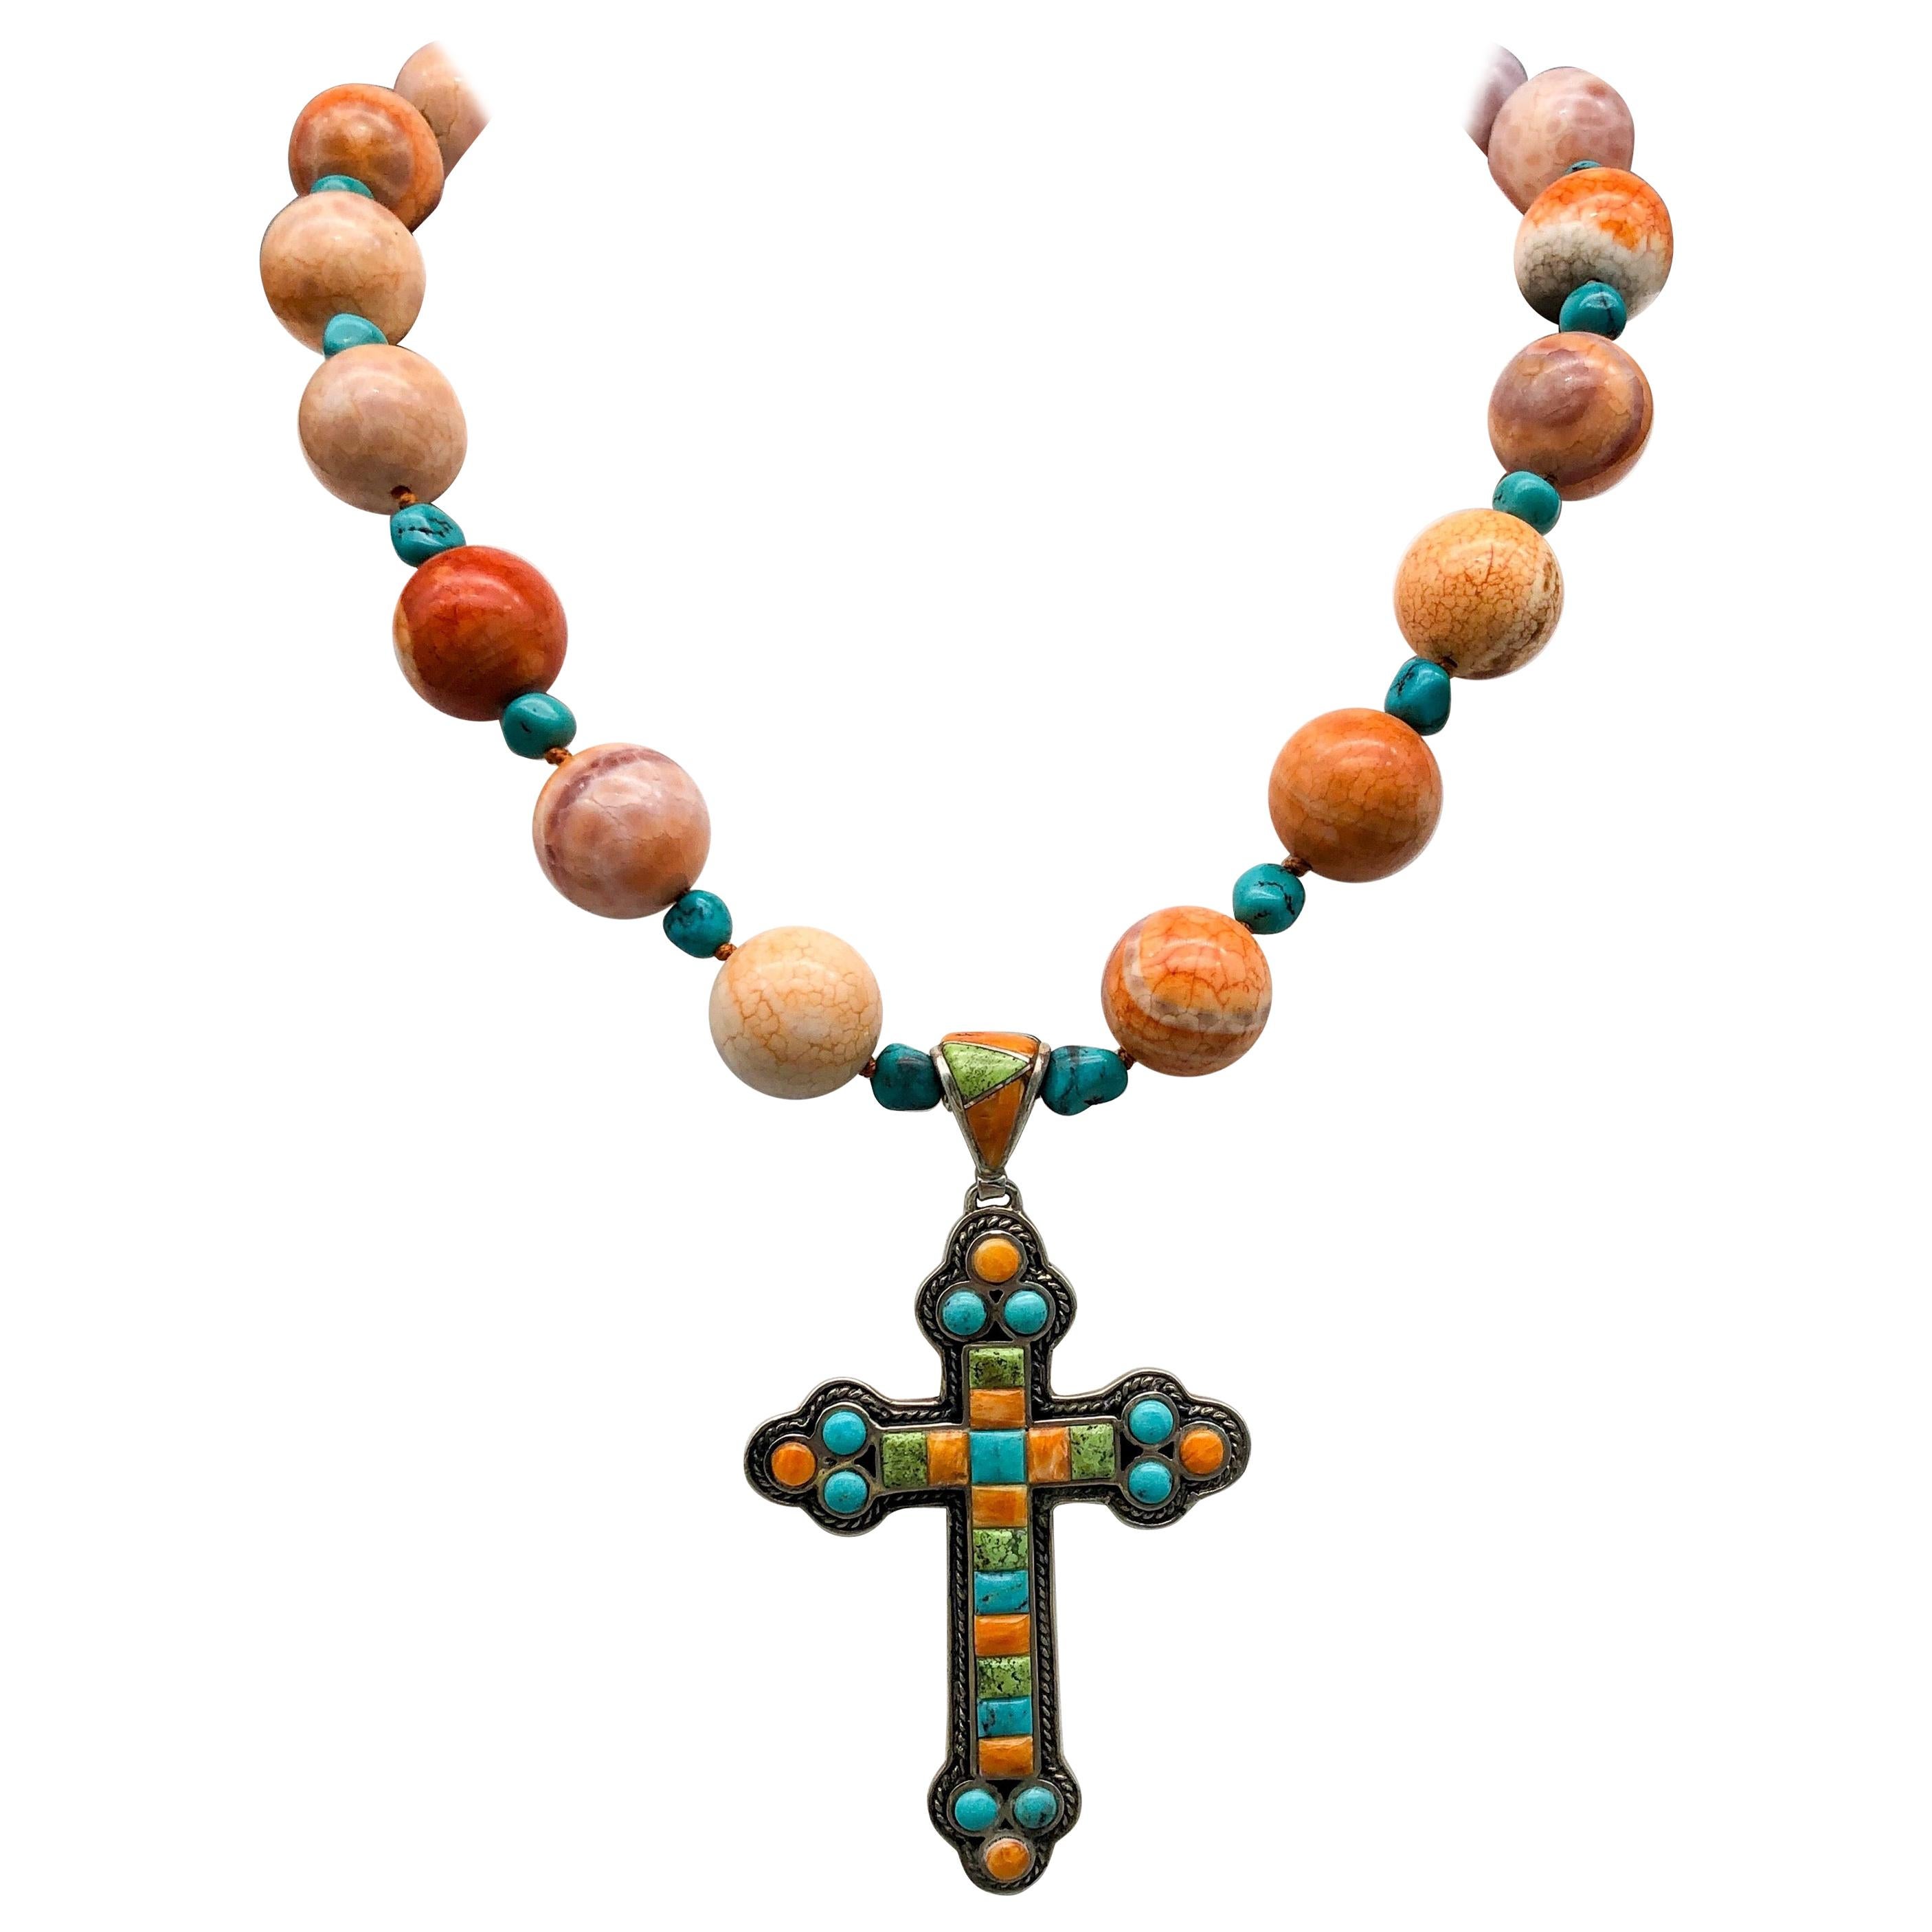 One-of-a-Kind

The necklace is created of polished 18 mm, Mexican Fire Opal beads. These natural beads have well-known orange crystal centers or stripes. Fire opal stones are quite different from the opals we’ve become used to. These stones were